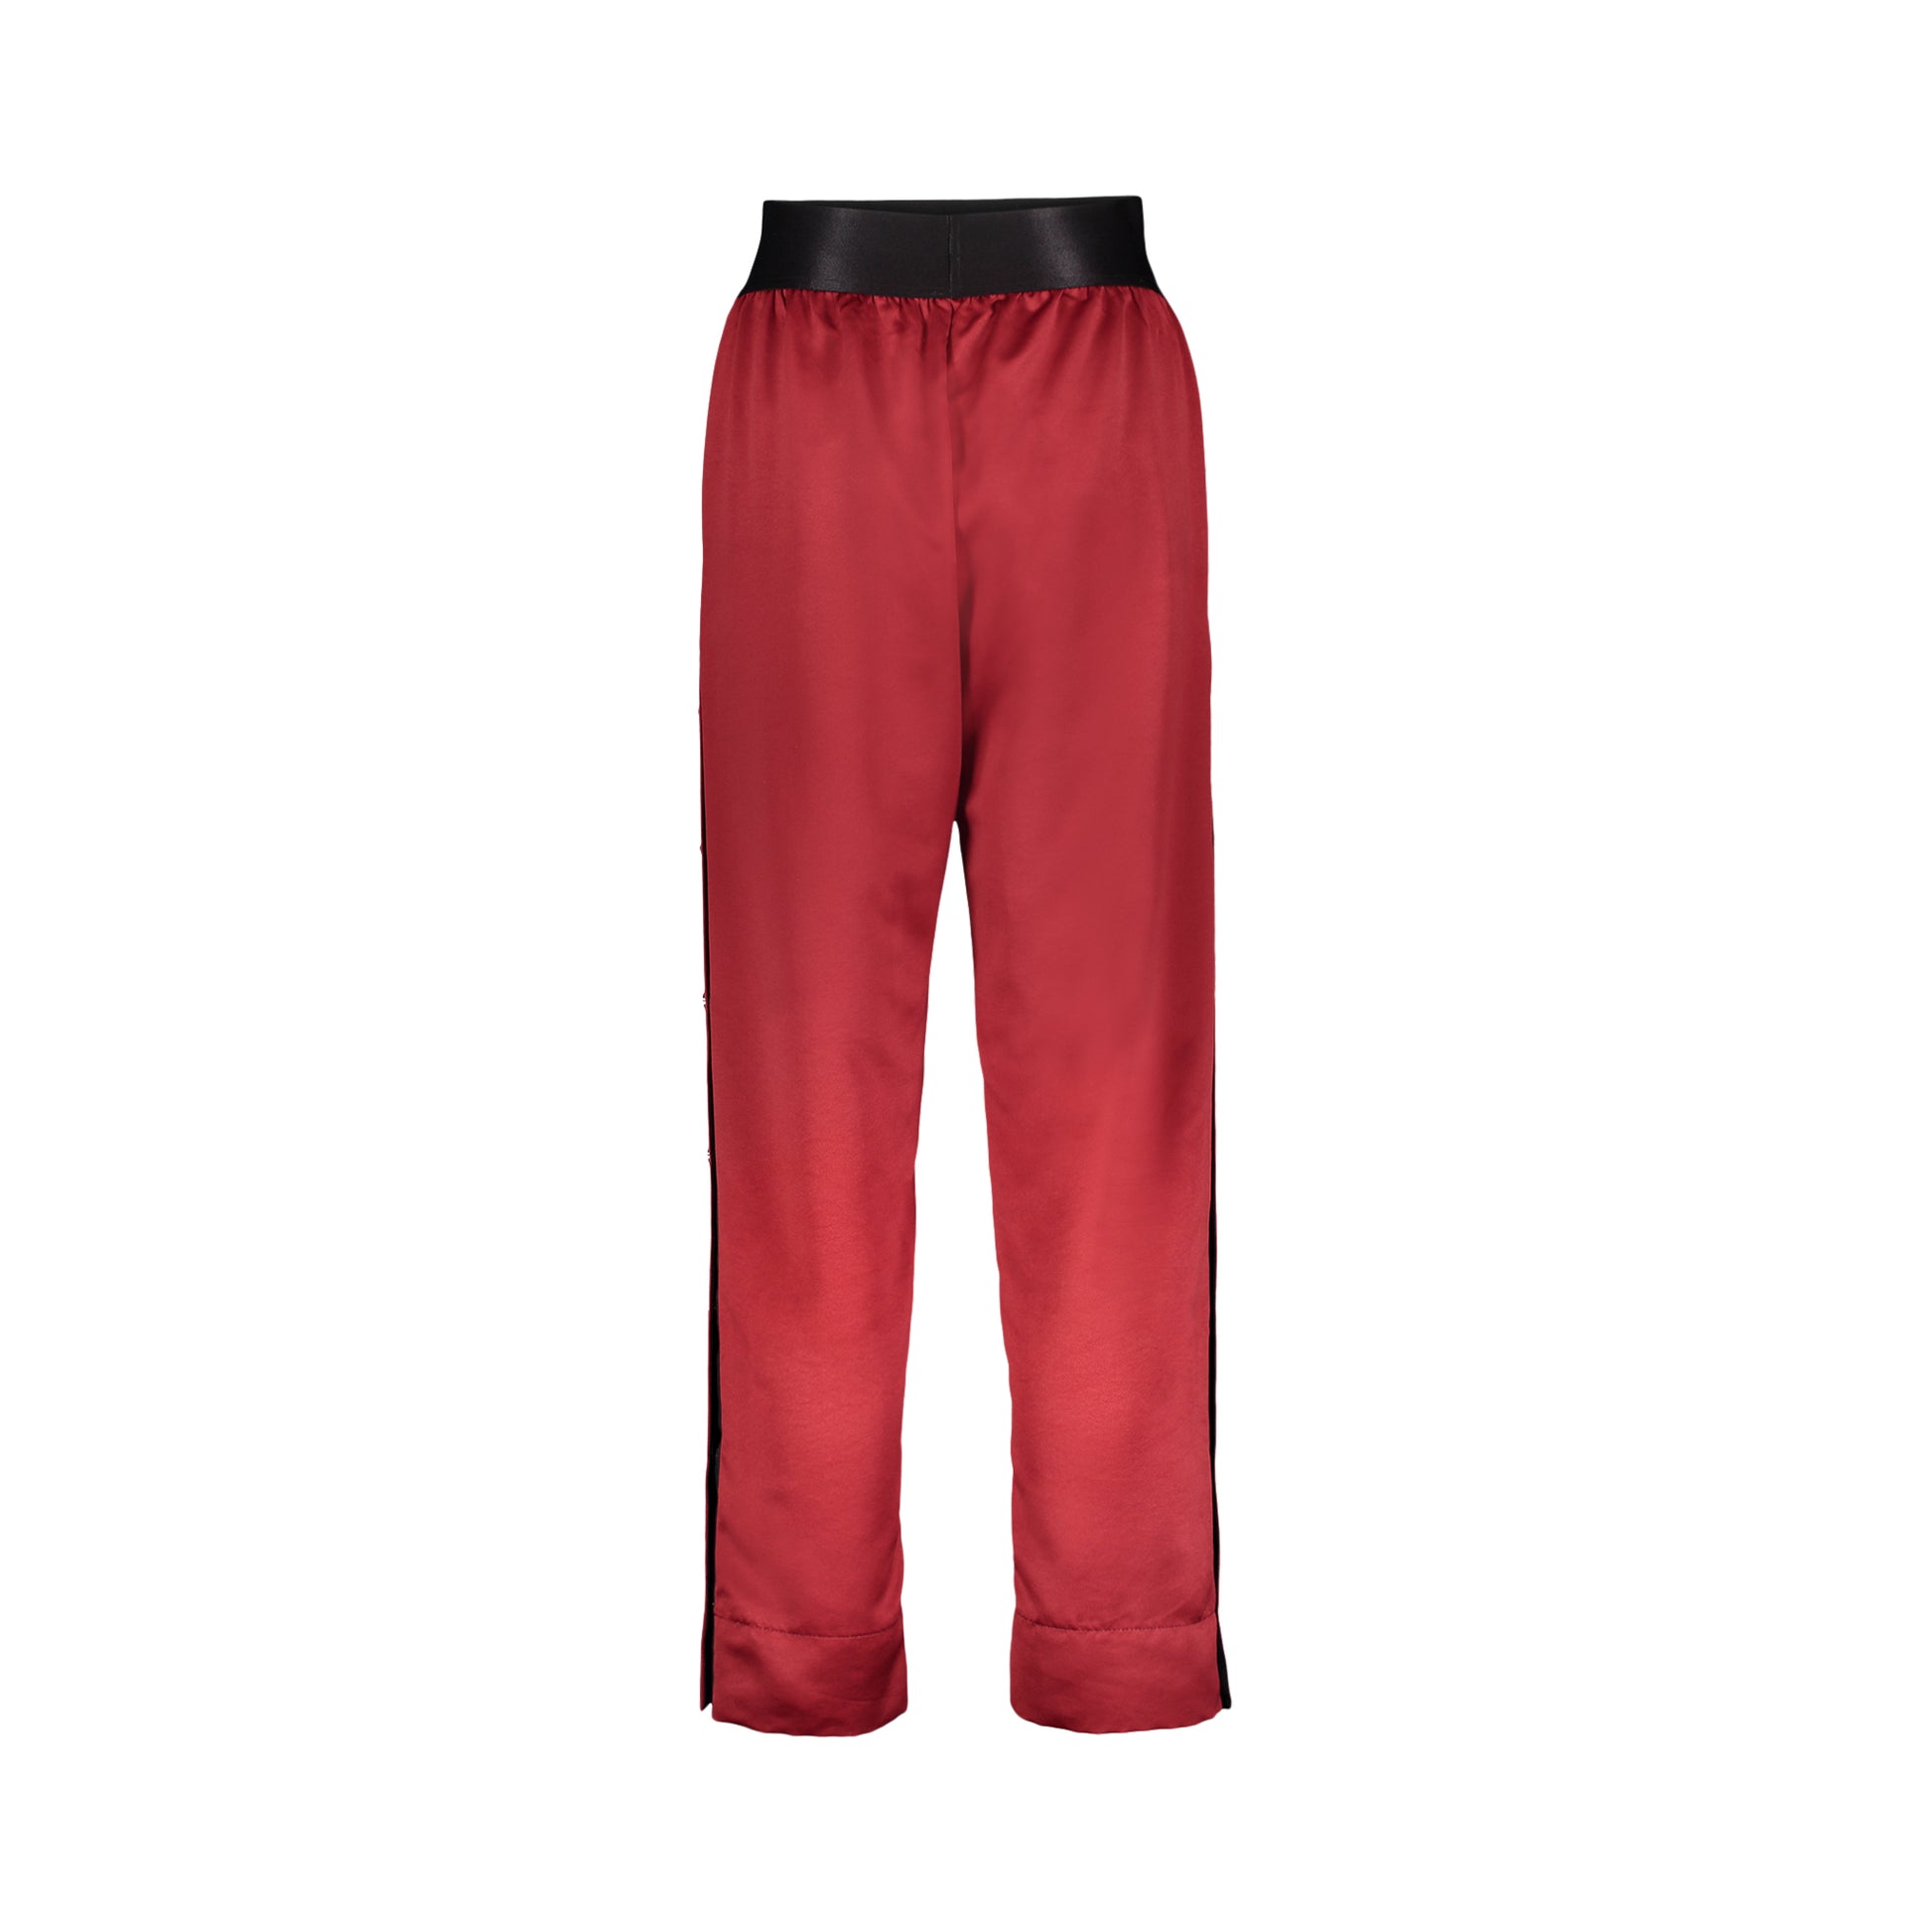 Clubmaster Track Pants freeshipping - LLESSUR NYC